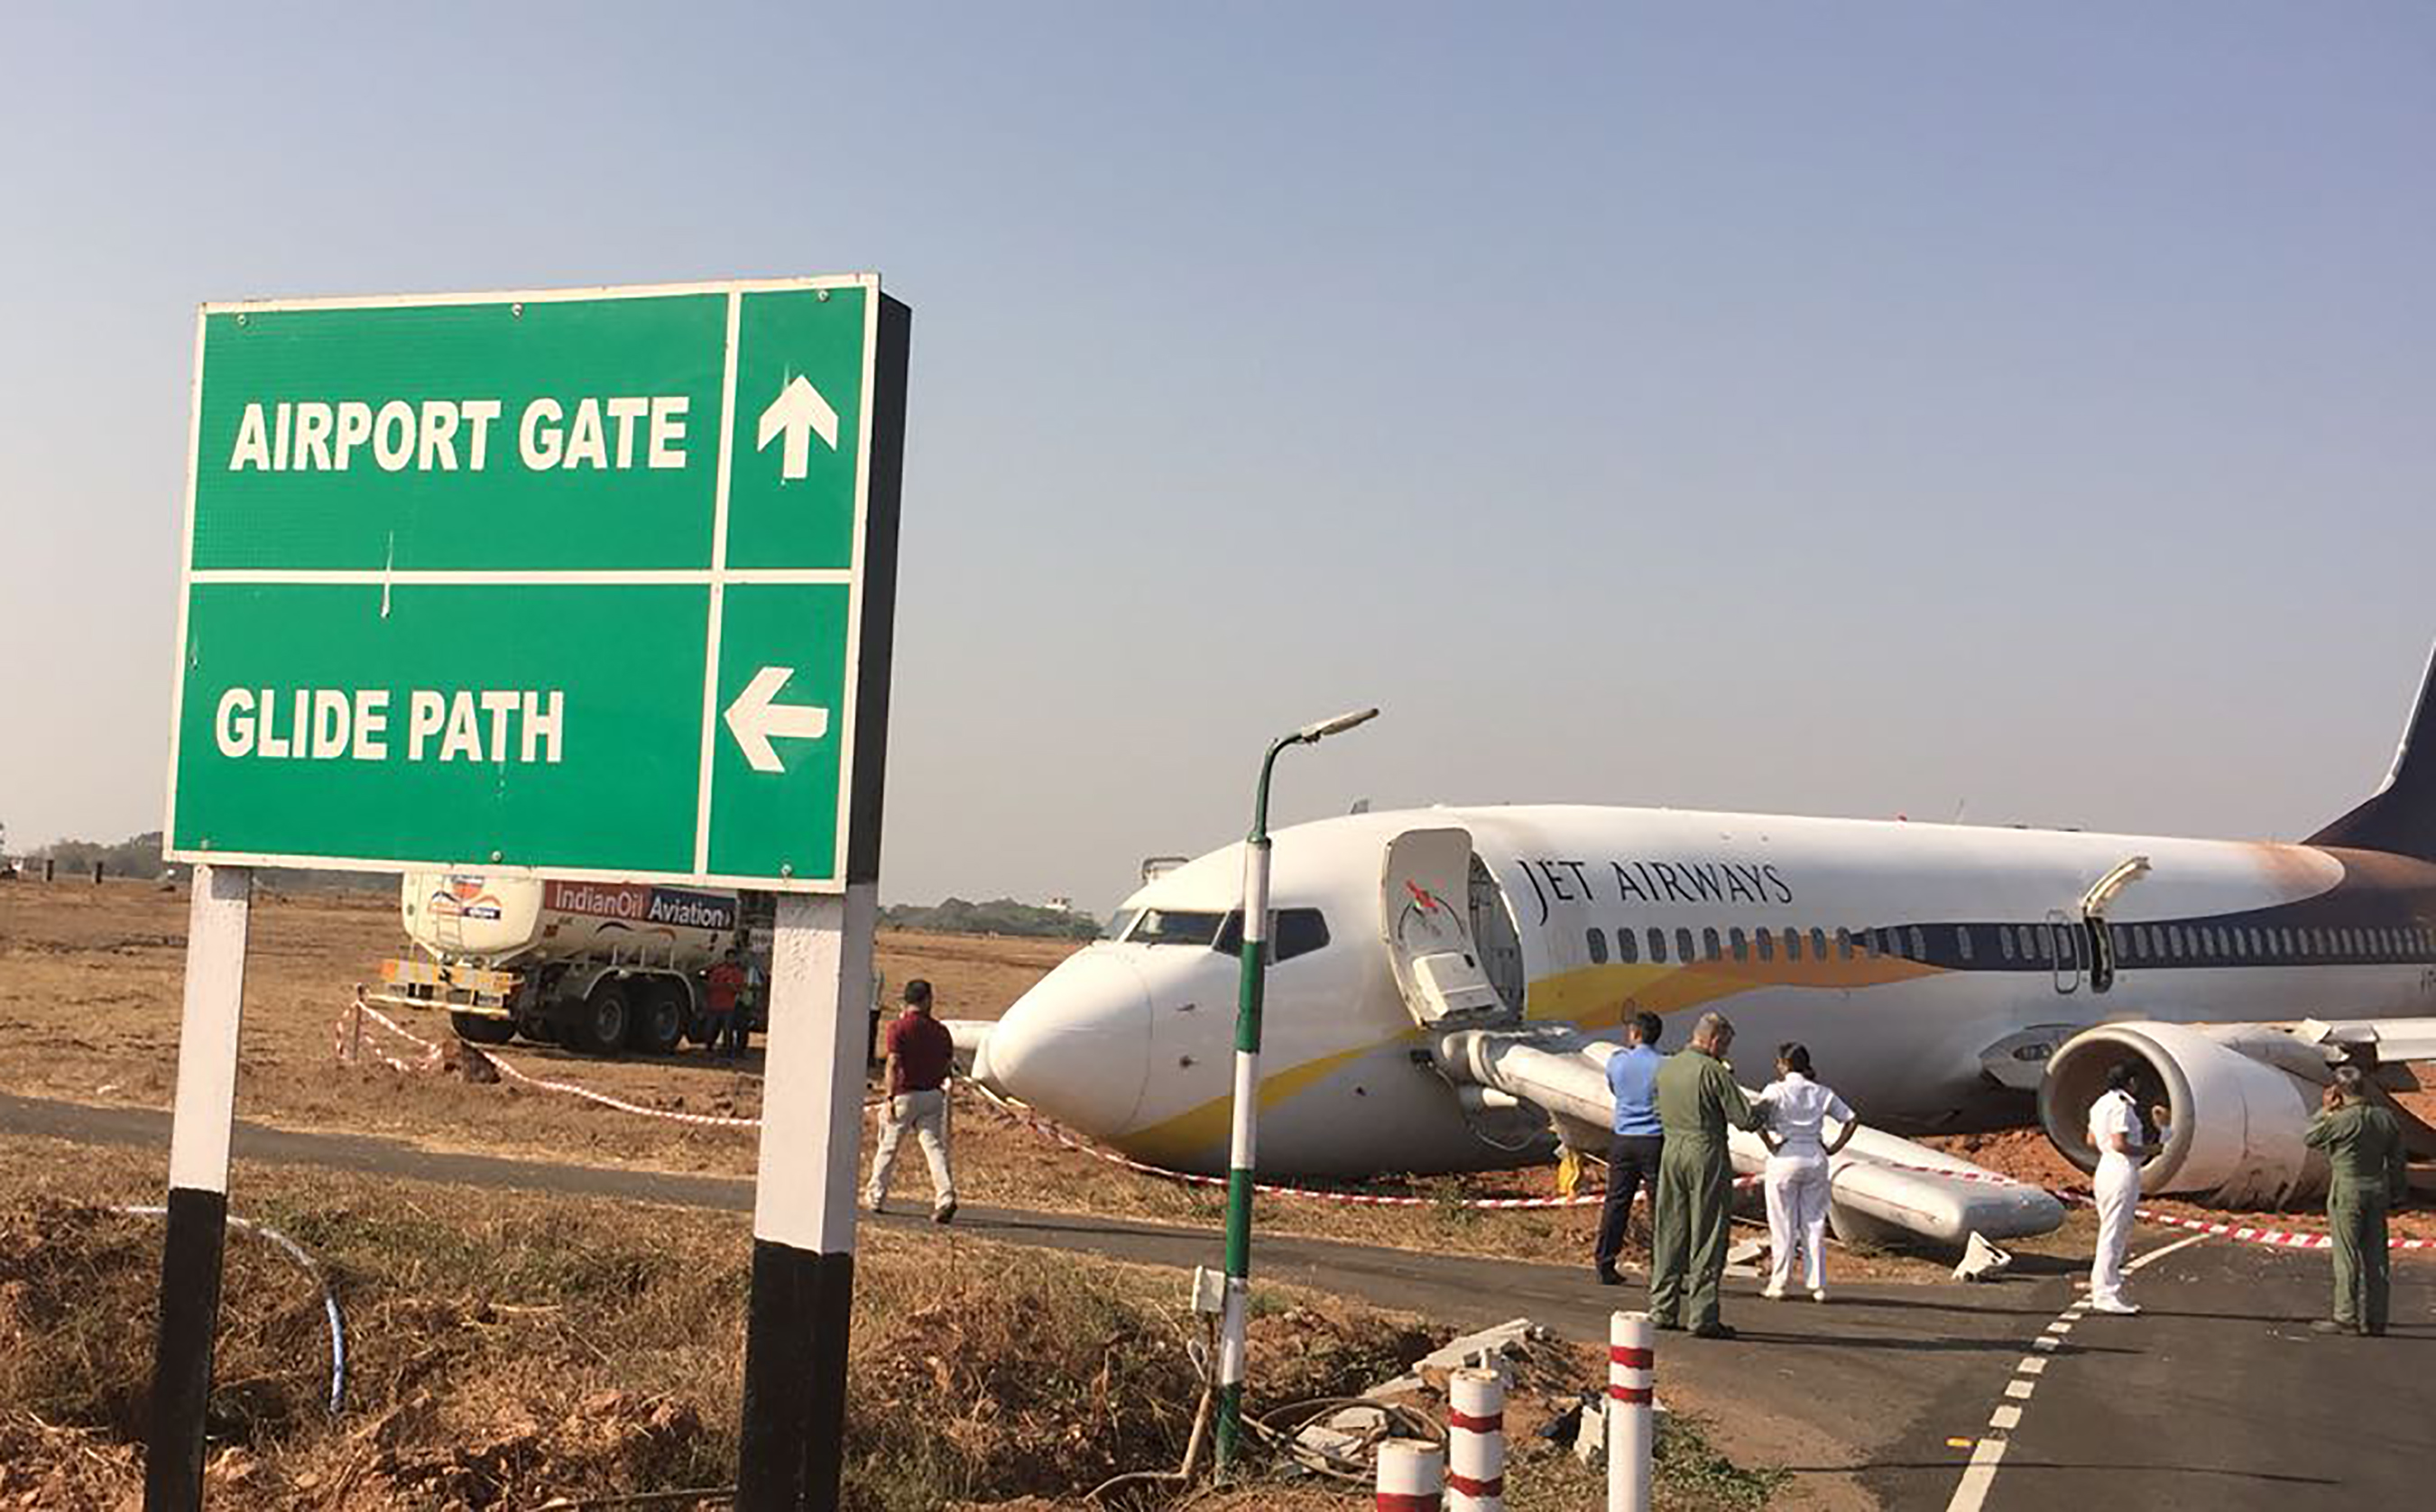 This handout photograph taken and received on December 27, 2016 from the Indian Ministry of Defence shows a damaged Jet Airways Boeing 737 after it skidded off the runway following an aborted take-off at the Goa Airport in Dabolim, India's western resort state of Goa.     An Indian plane carrying 161 passengers and crew skidded off the runway at Goa airport early on December 27, injuring 15 people. The Indian Navy, which runs the airport in western India, said it was not yet clear what caused the Jet Airways plane to veer off the runway. / AFP PHOTO / Indian Ministry of Defence / Handout / RESTRICTED TO EDITORIAL USE - MANDATORY CREDIT "AFP PHOTO / MINISTRY OF DEFENCE" - NO MARKETING NO ADVERTISING CAMPAIGNS - DISTRIBUTED AS A SERVICE TO CLIENTS